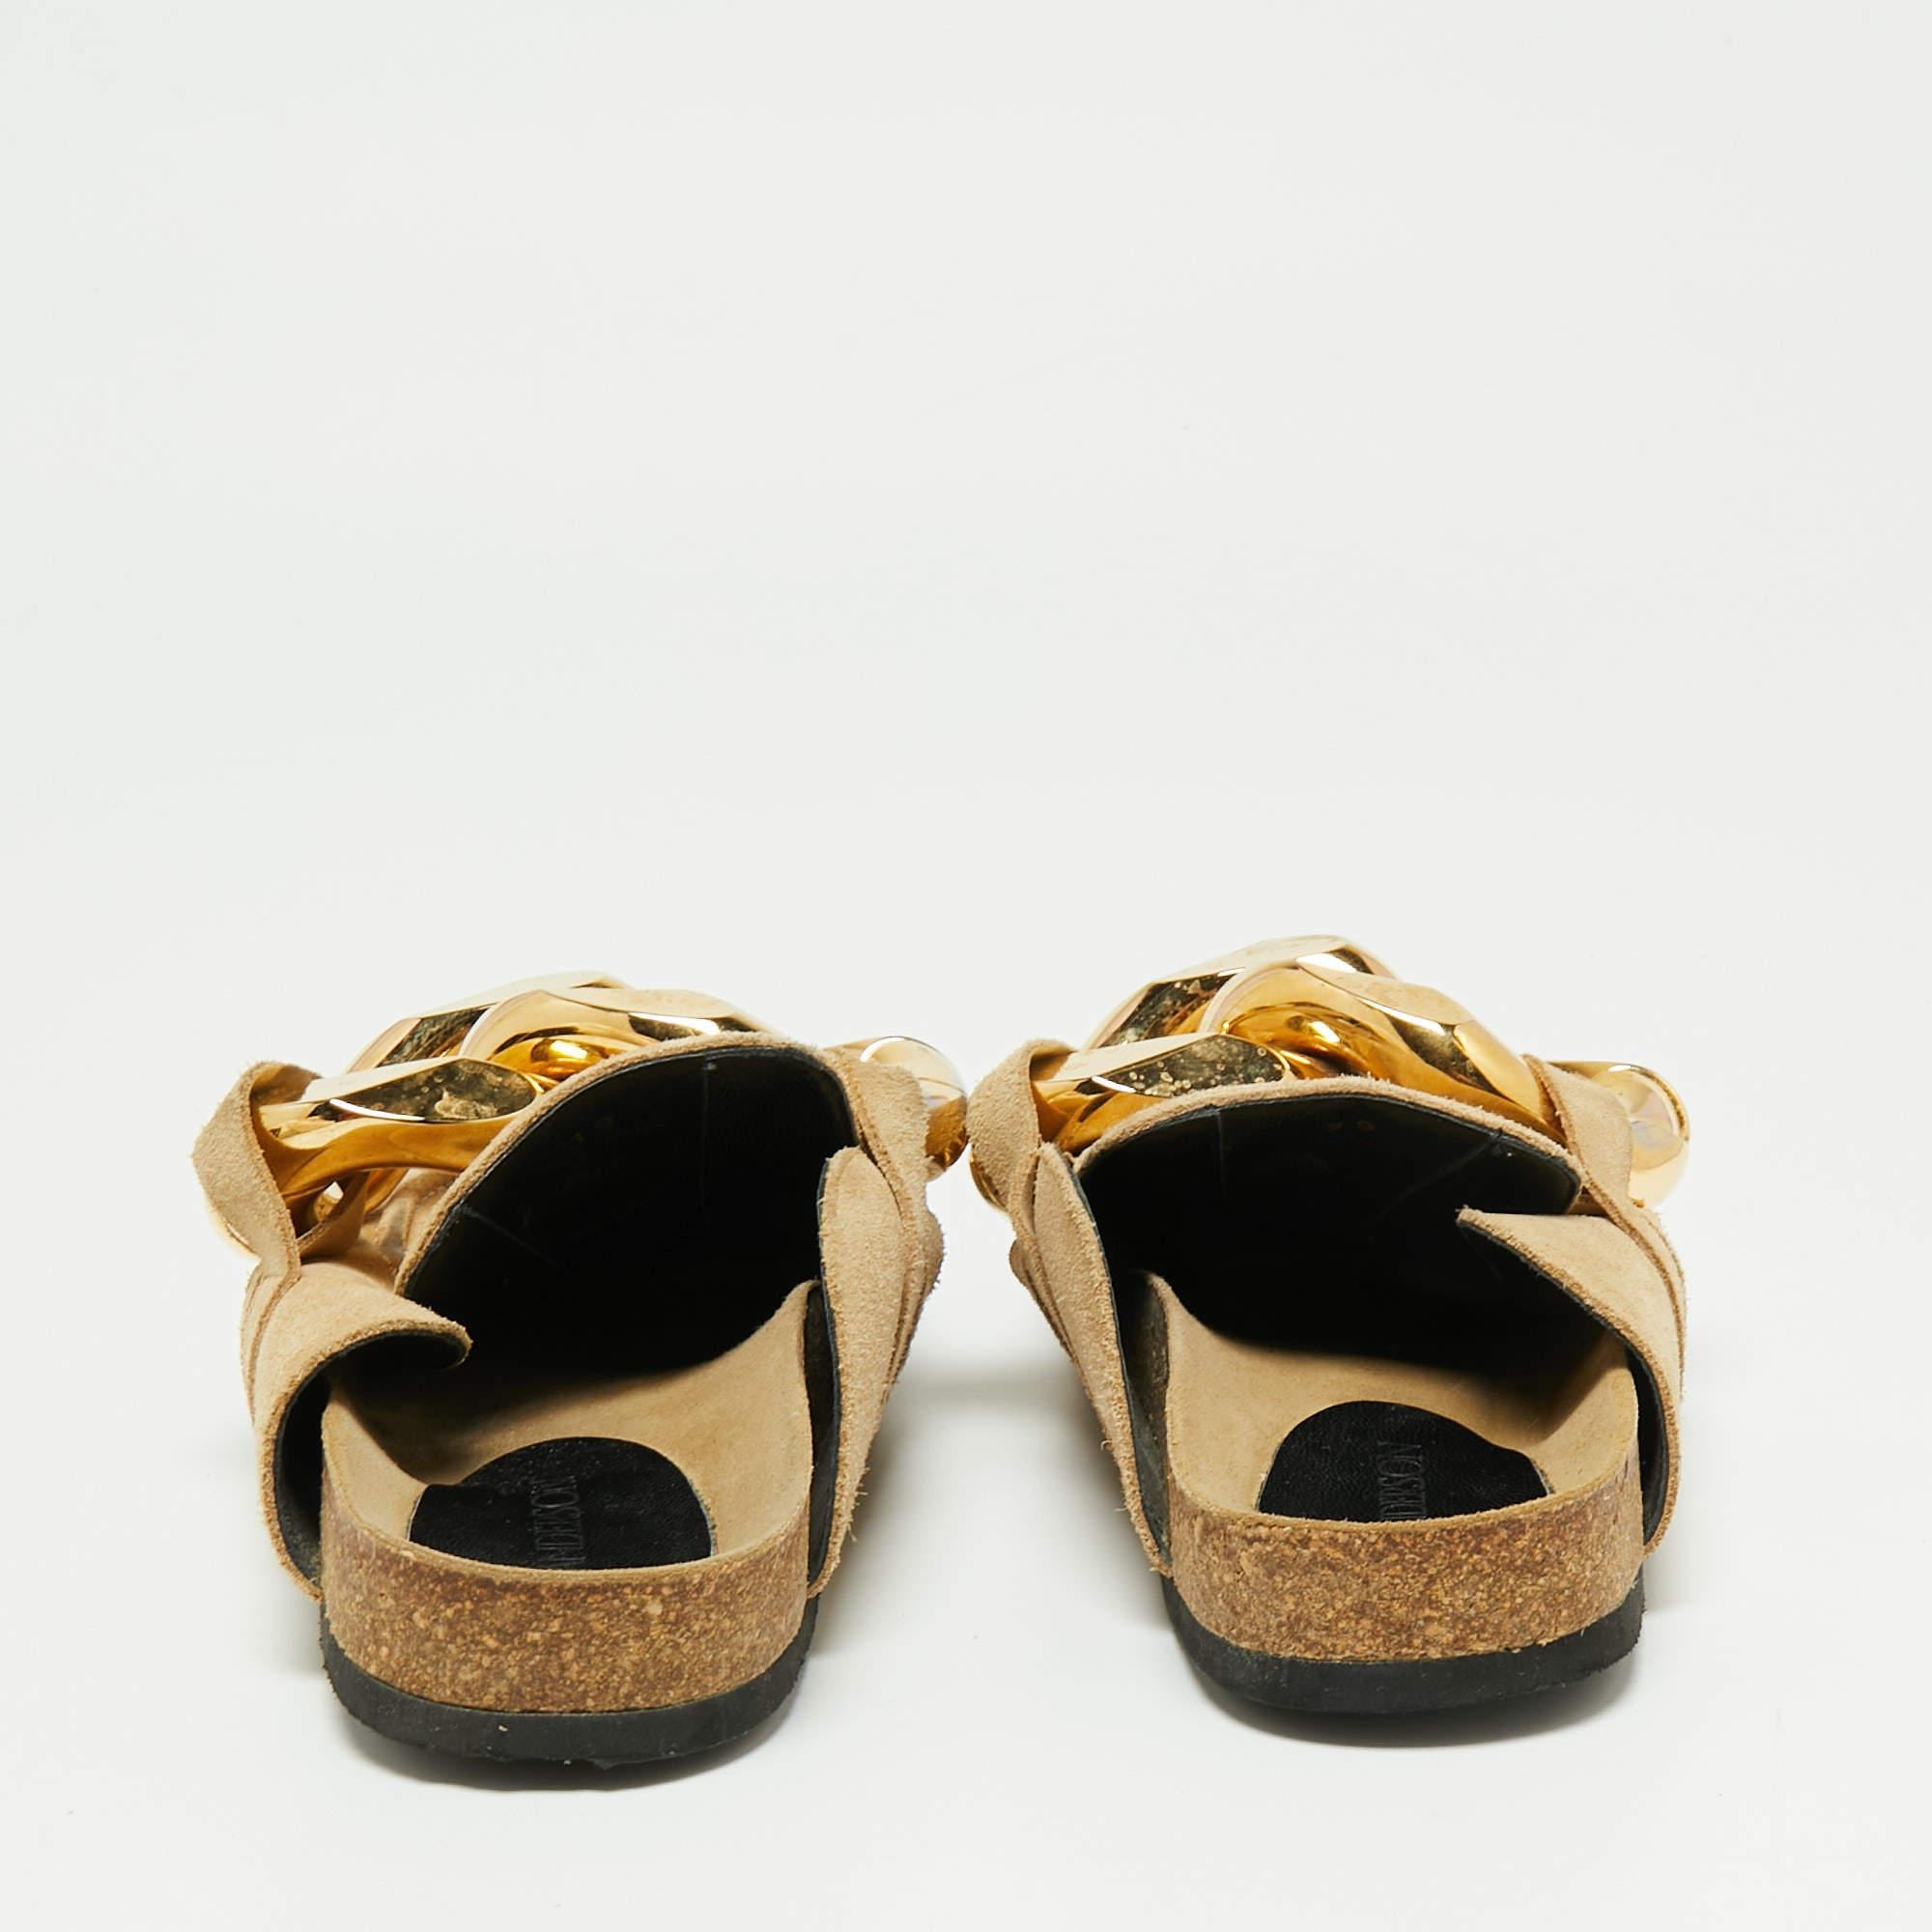 Walk stylishly in these slide sandals from J.W.Anderson. Designed using beige suede, these flat slides display a chain-link accent on the vamps. They are finished with gold-toned hardware for a classy effect. Match them with your summer dresses for